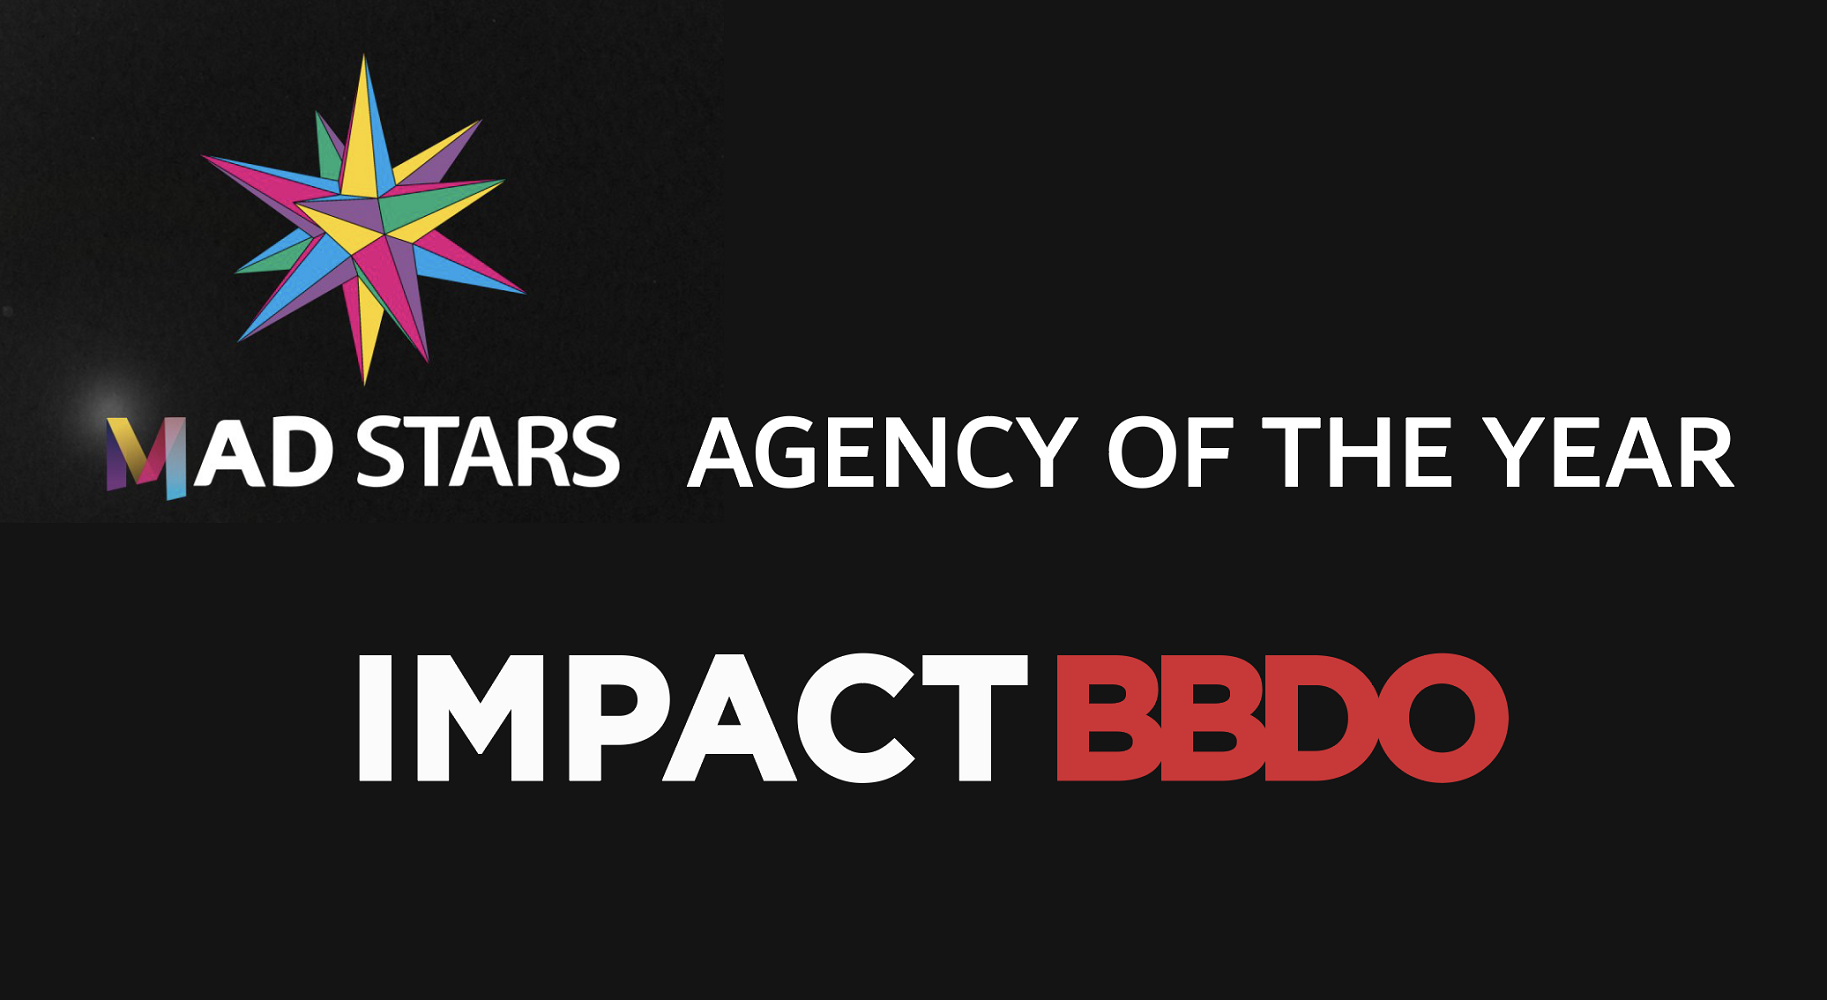 Impact BBDO Named Agency of The Year at 2022 Mad Stars